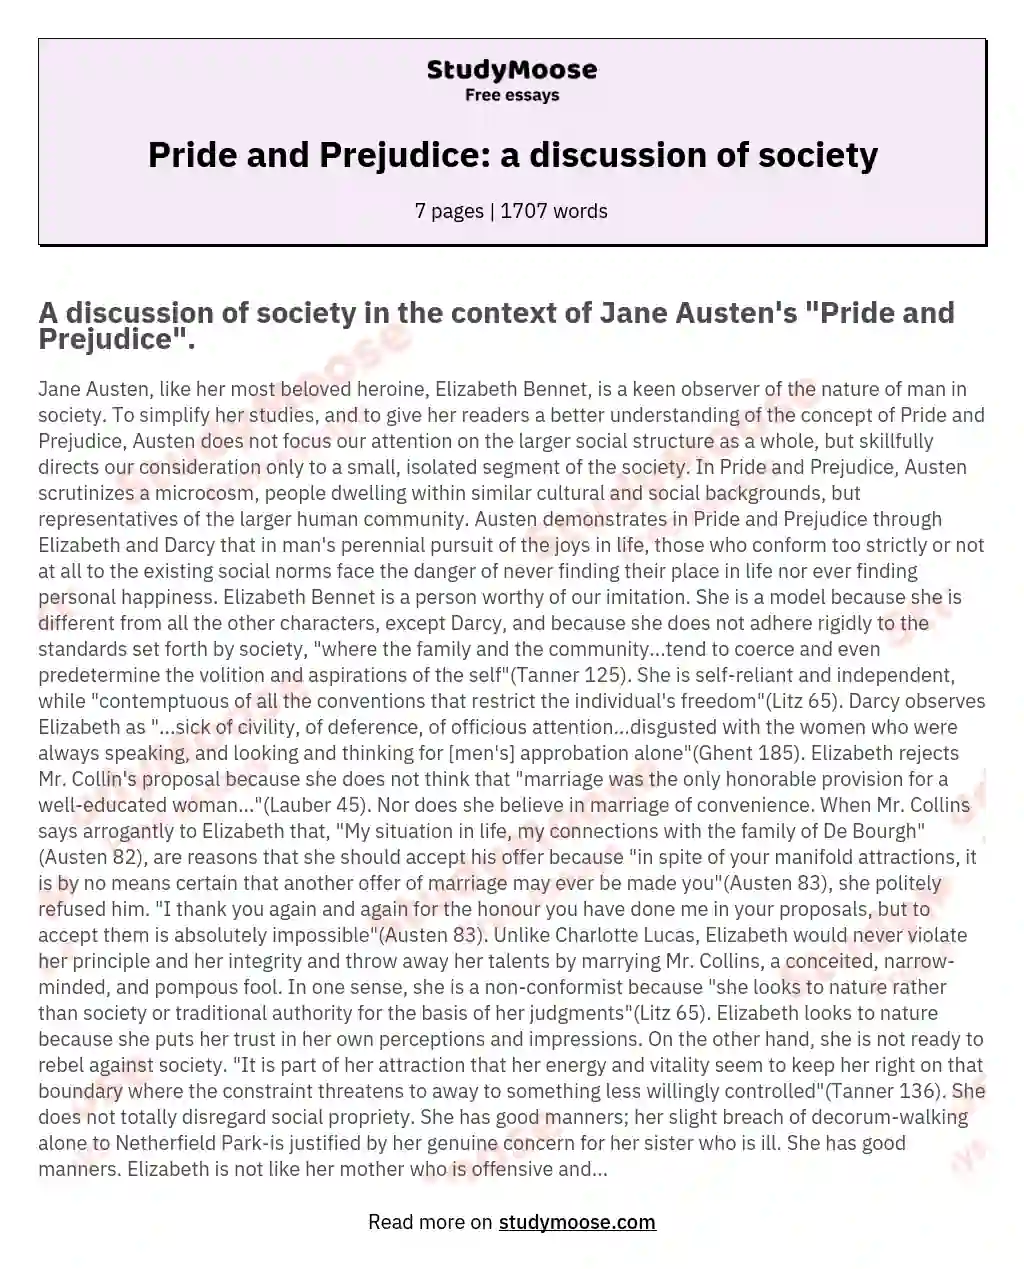 Pride and Prejudice: a discussion of society essay